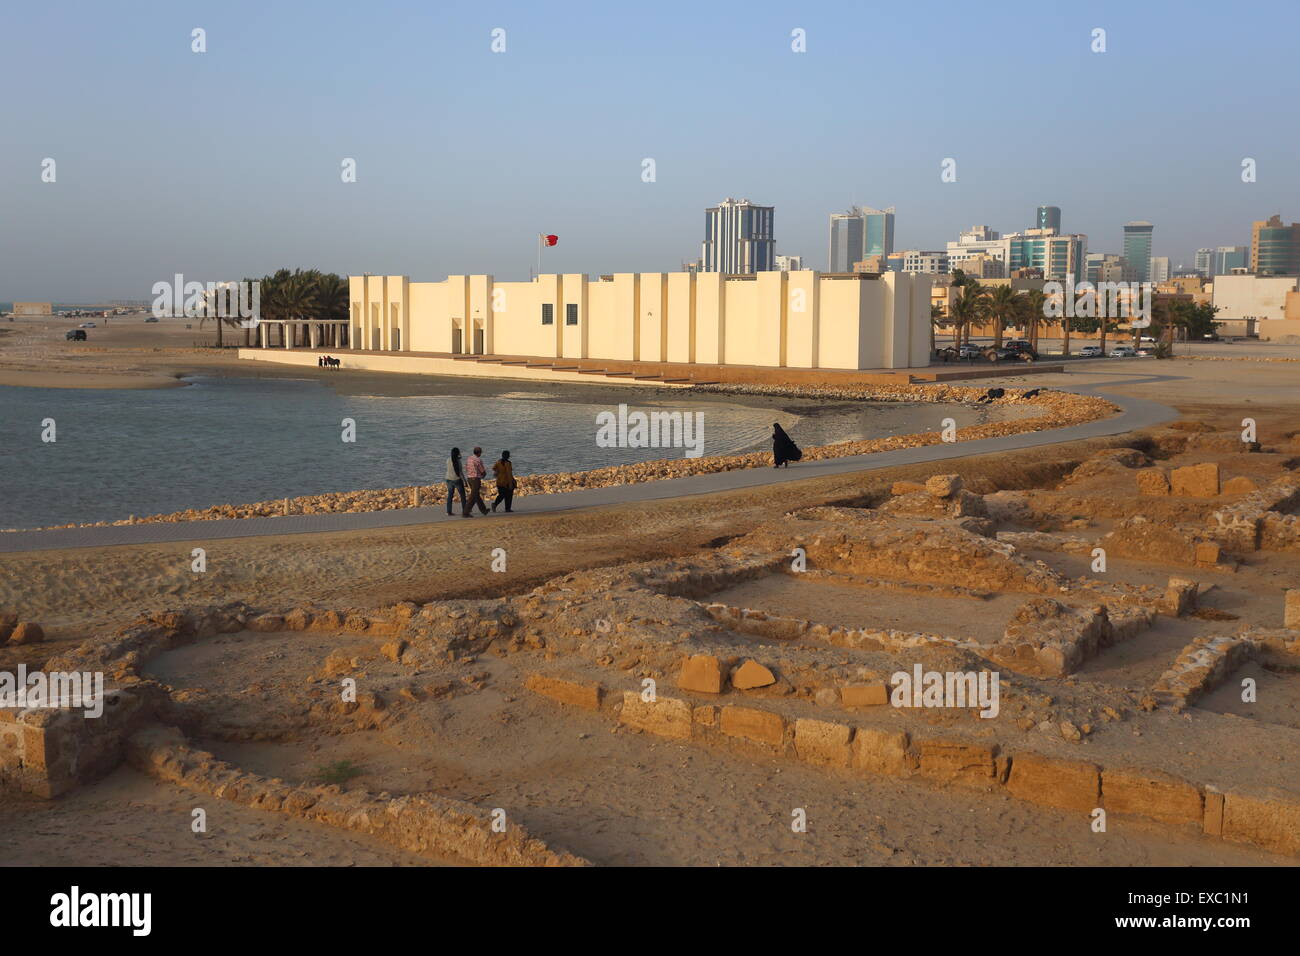 Bahrain Fort Museum with excavations of Dilmun-era ruins in front, Kingdom of Bahrain Stock Photo